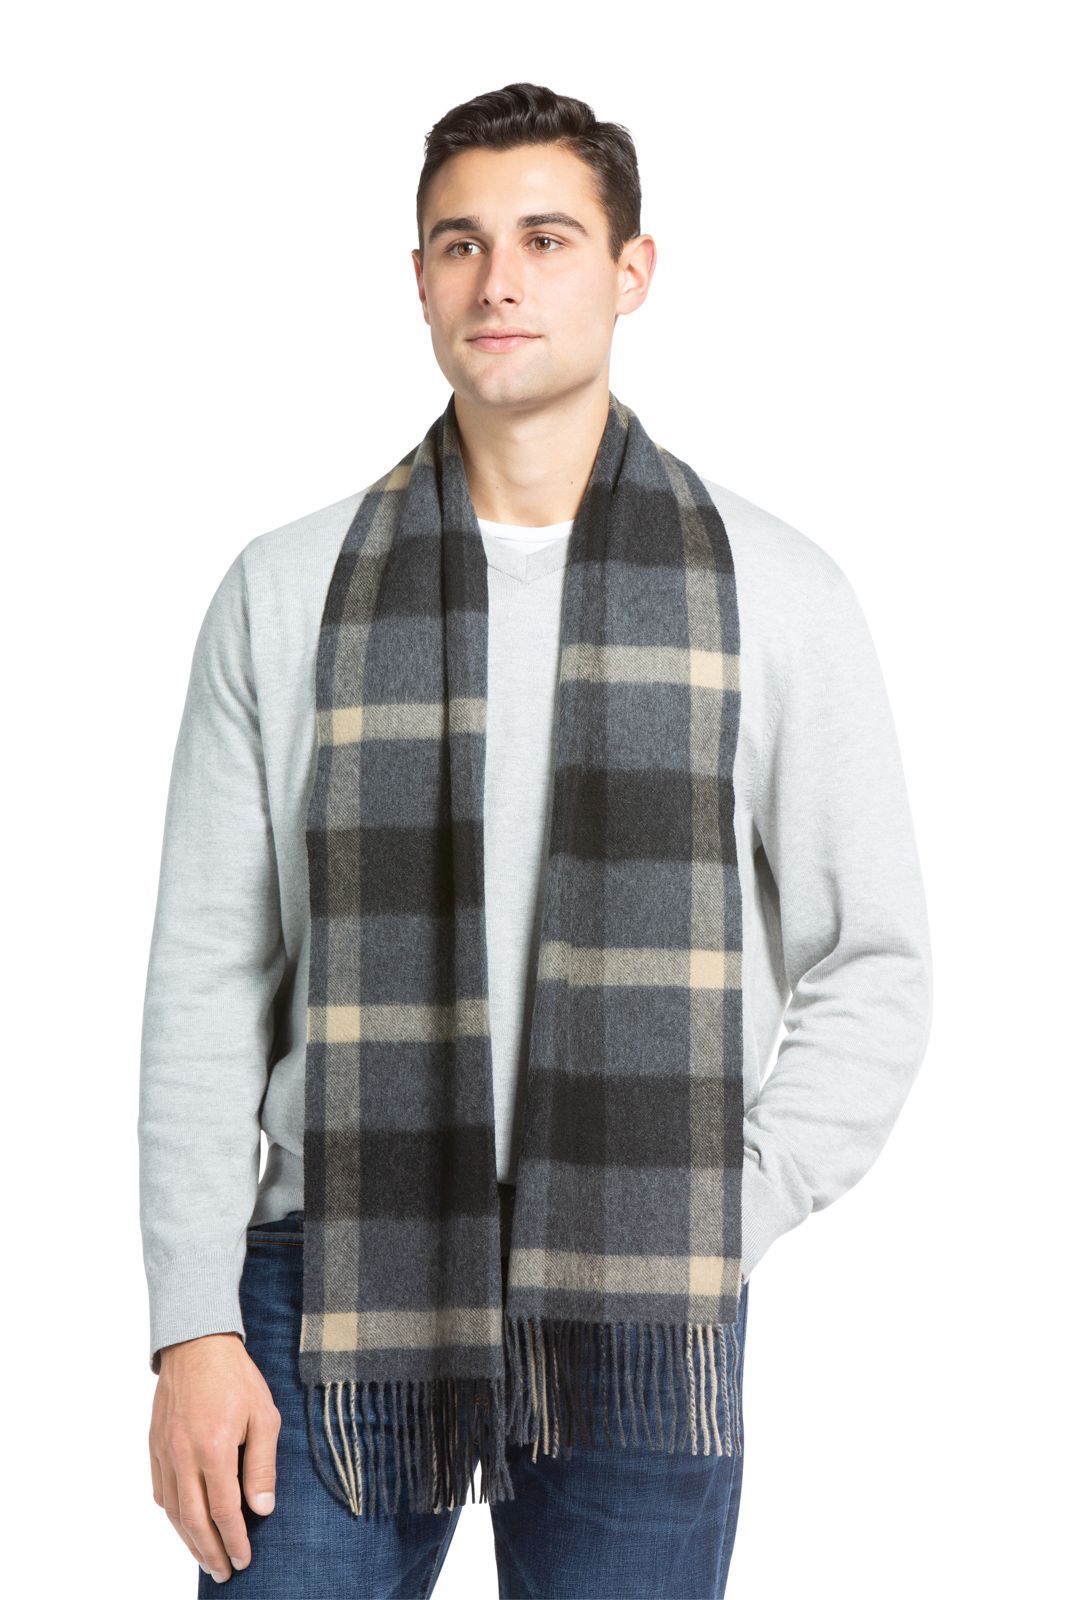 Mens Scarves | Mens 100% Pure Cashmere Scarf | Fishers Finery